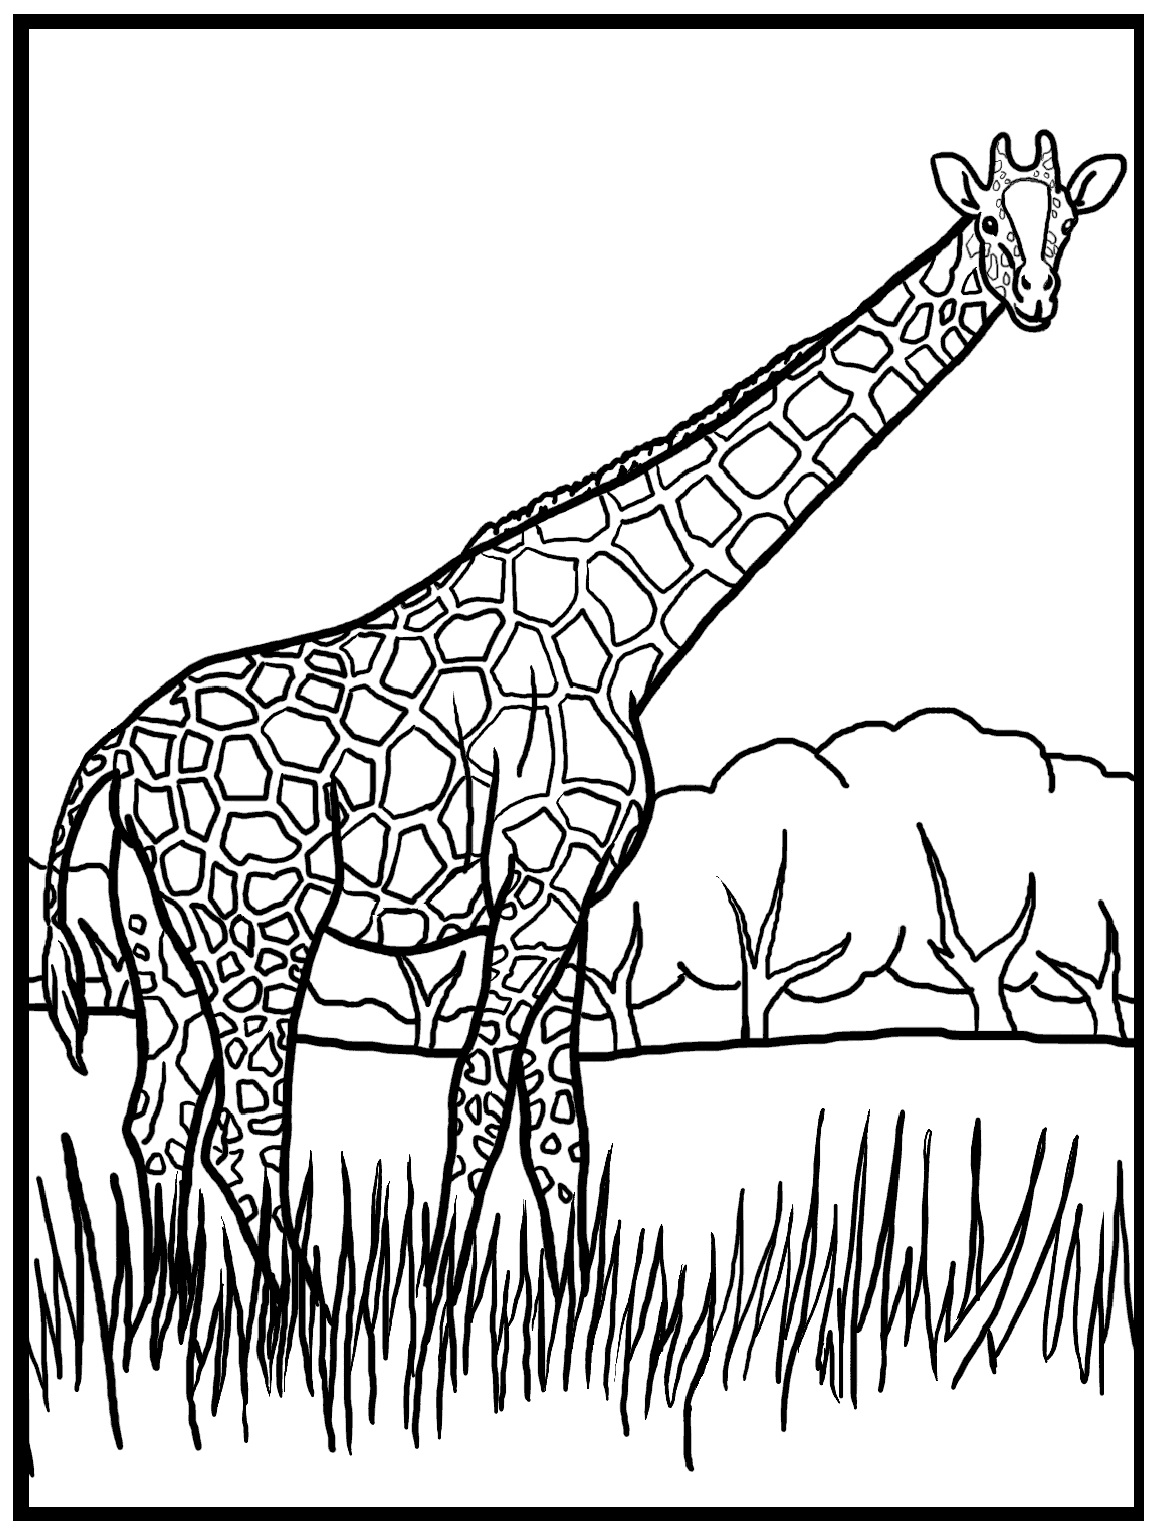 cute coloring pages of baby giraffes